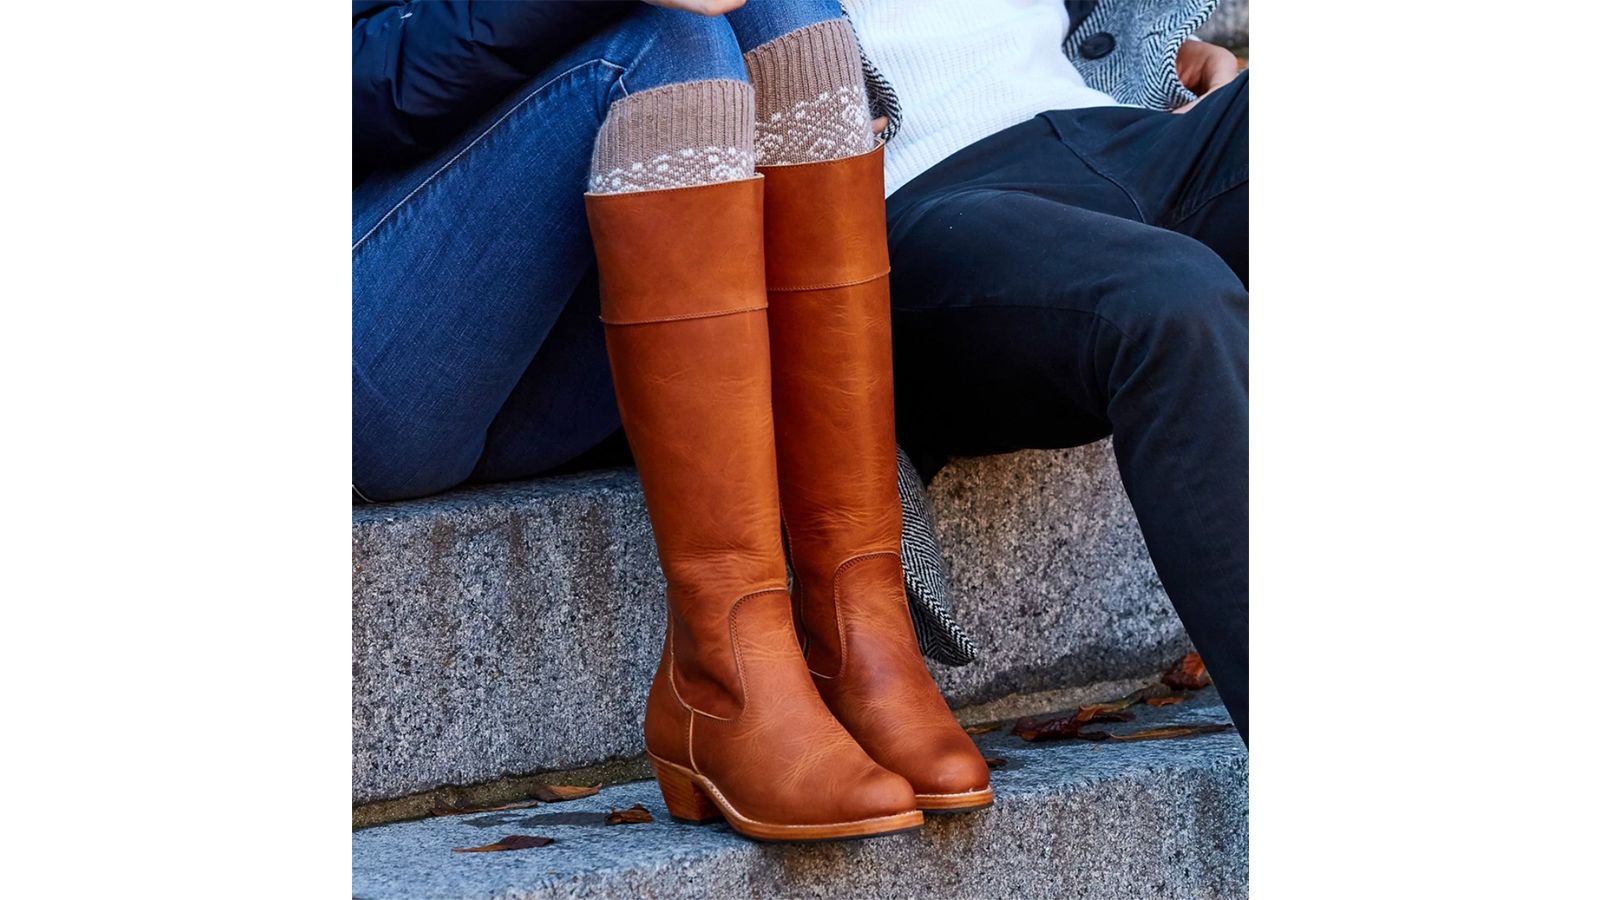 Late Wide Calf Boot, Women's Slouchy Boots